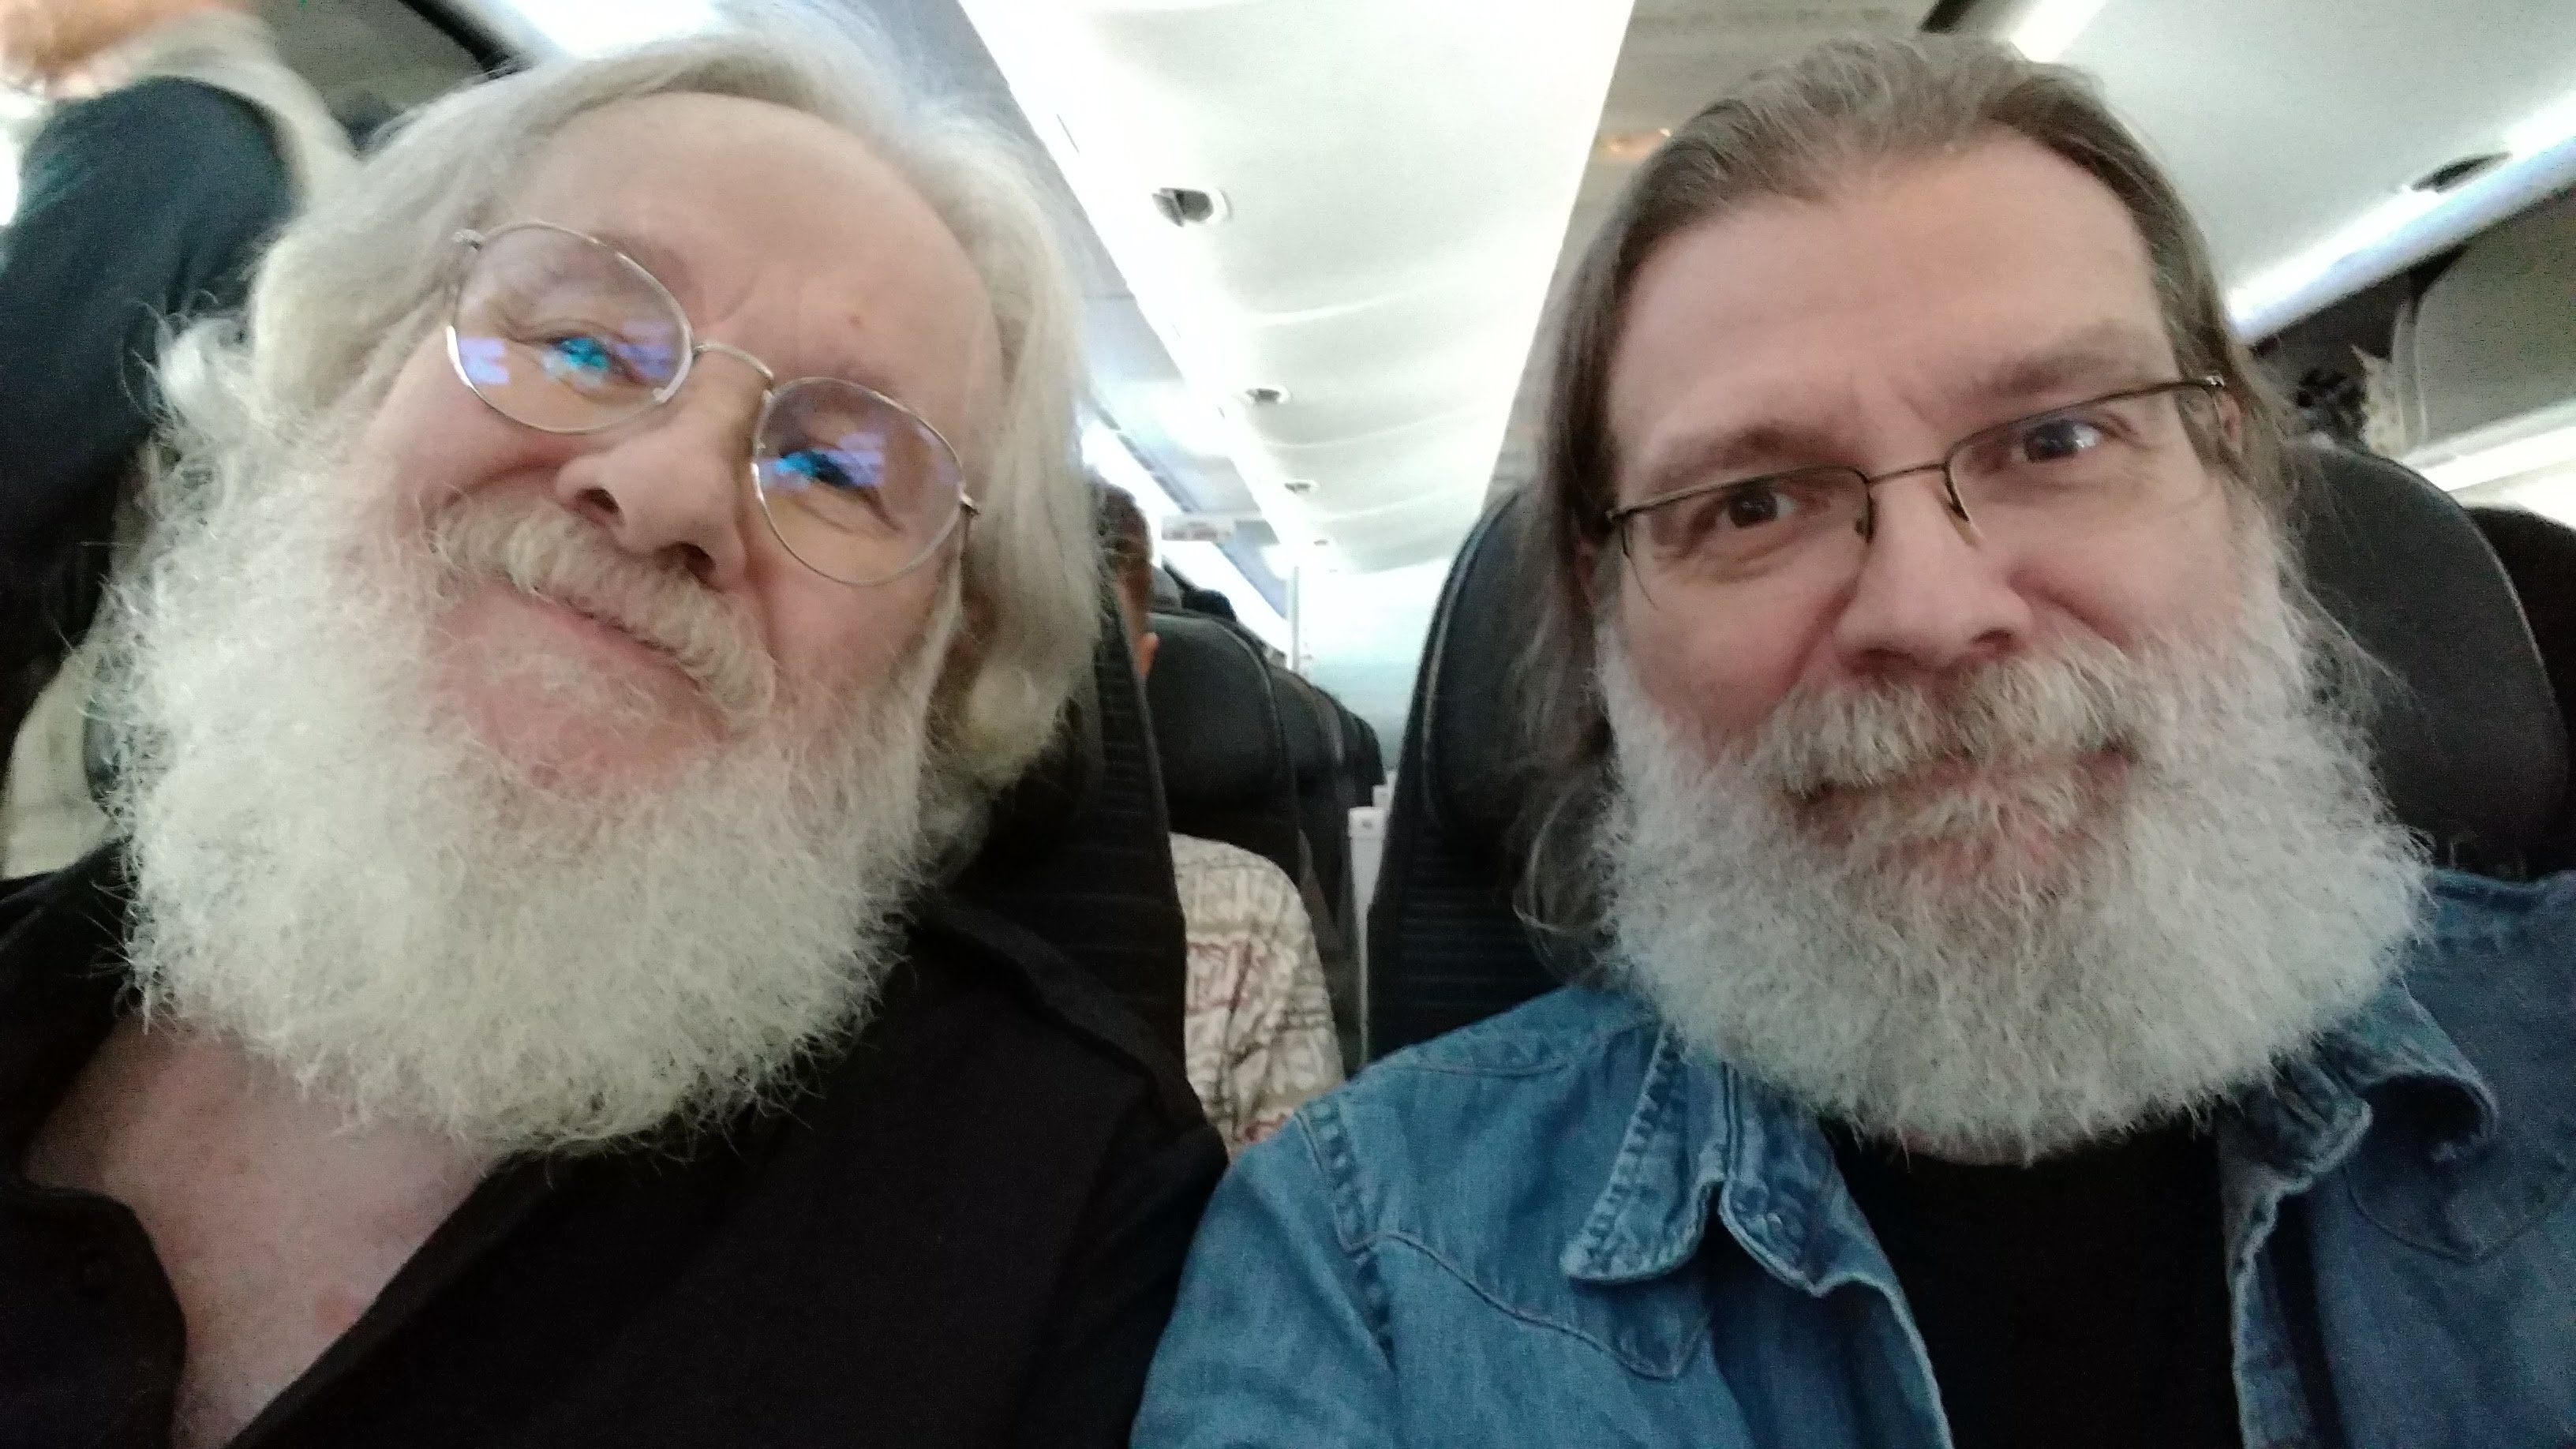 Chris and Earl selfie on the plane.